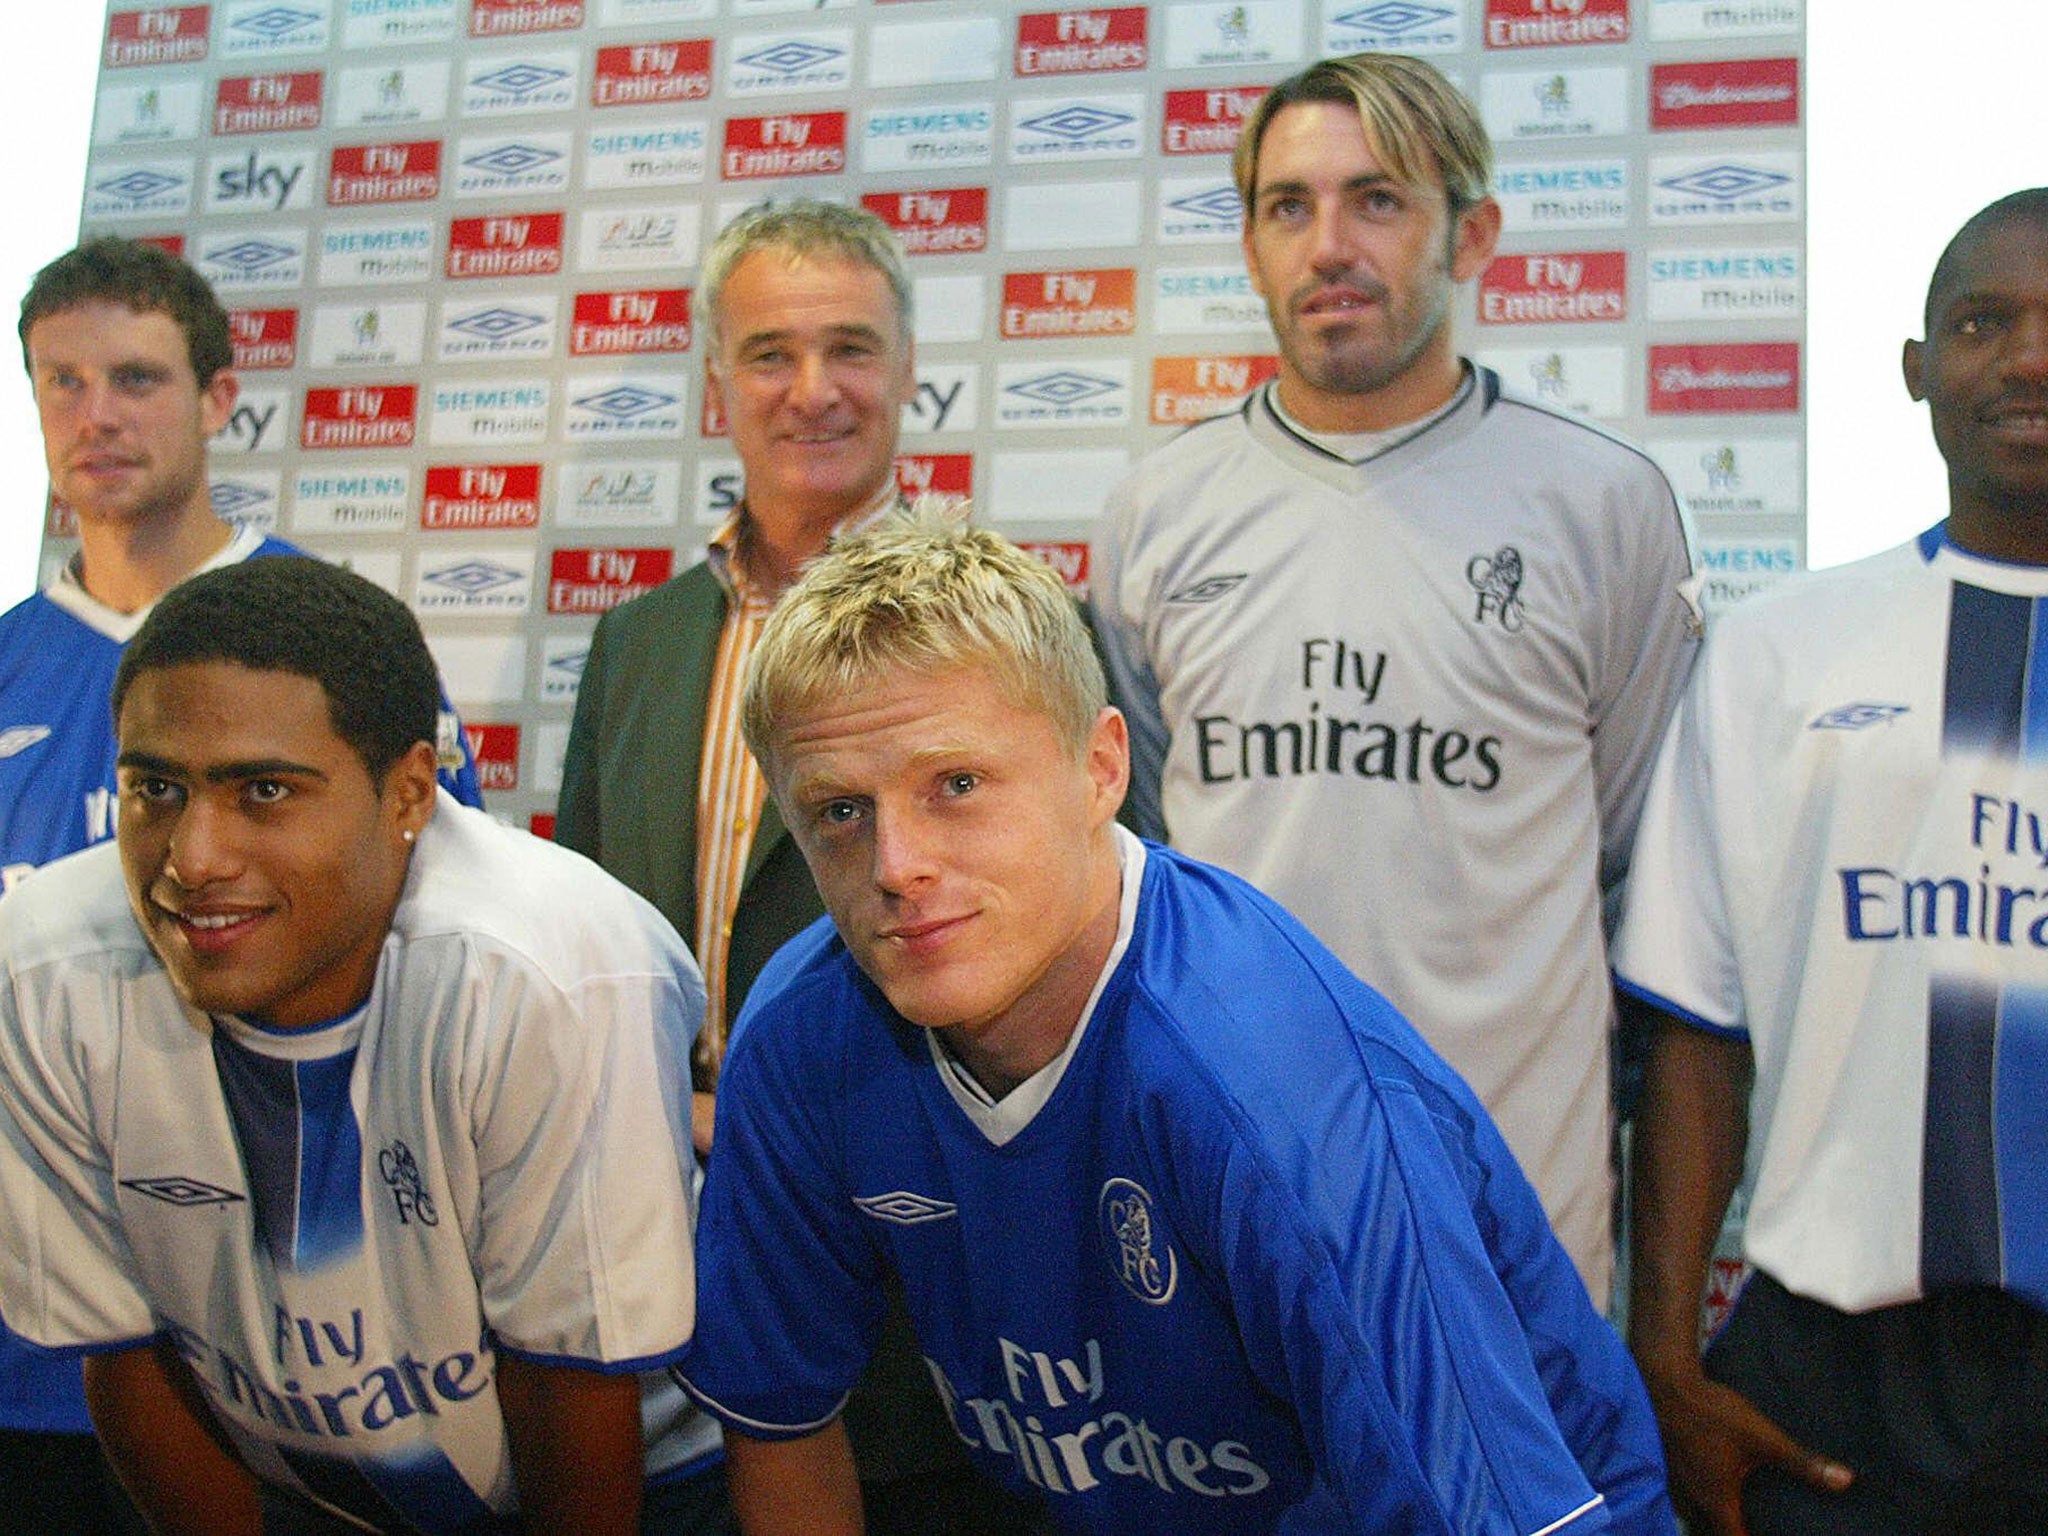 Claudio Rainieri (Back 2nd L) stands with his newest players Glen Johnson ( Front L), Damien Duff (Front R), Wayne Bridge (Back L), Marco Ambrosio ( Back 2nd R), and Geremi in August 2003